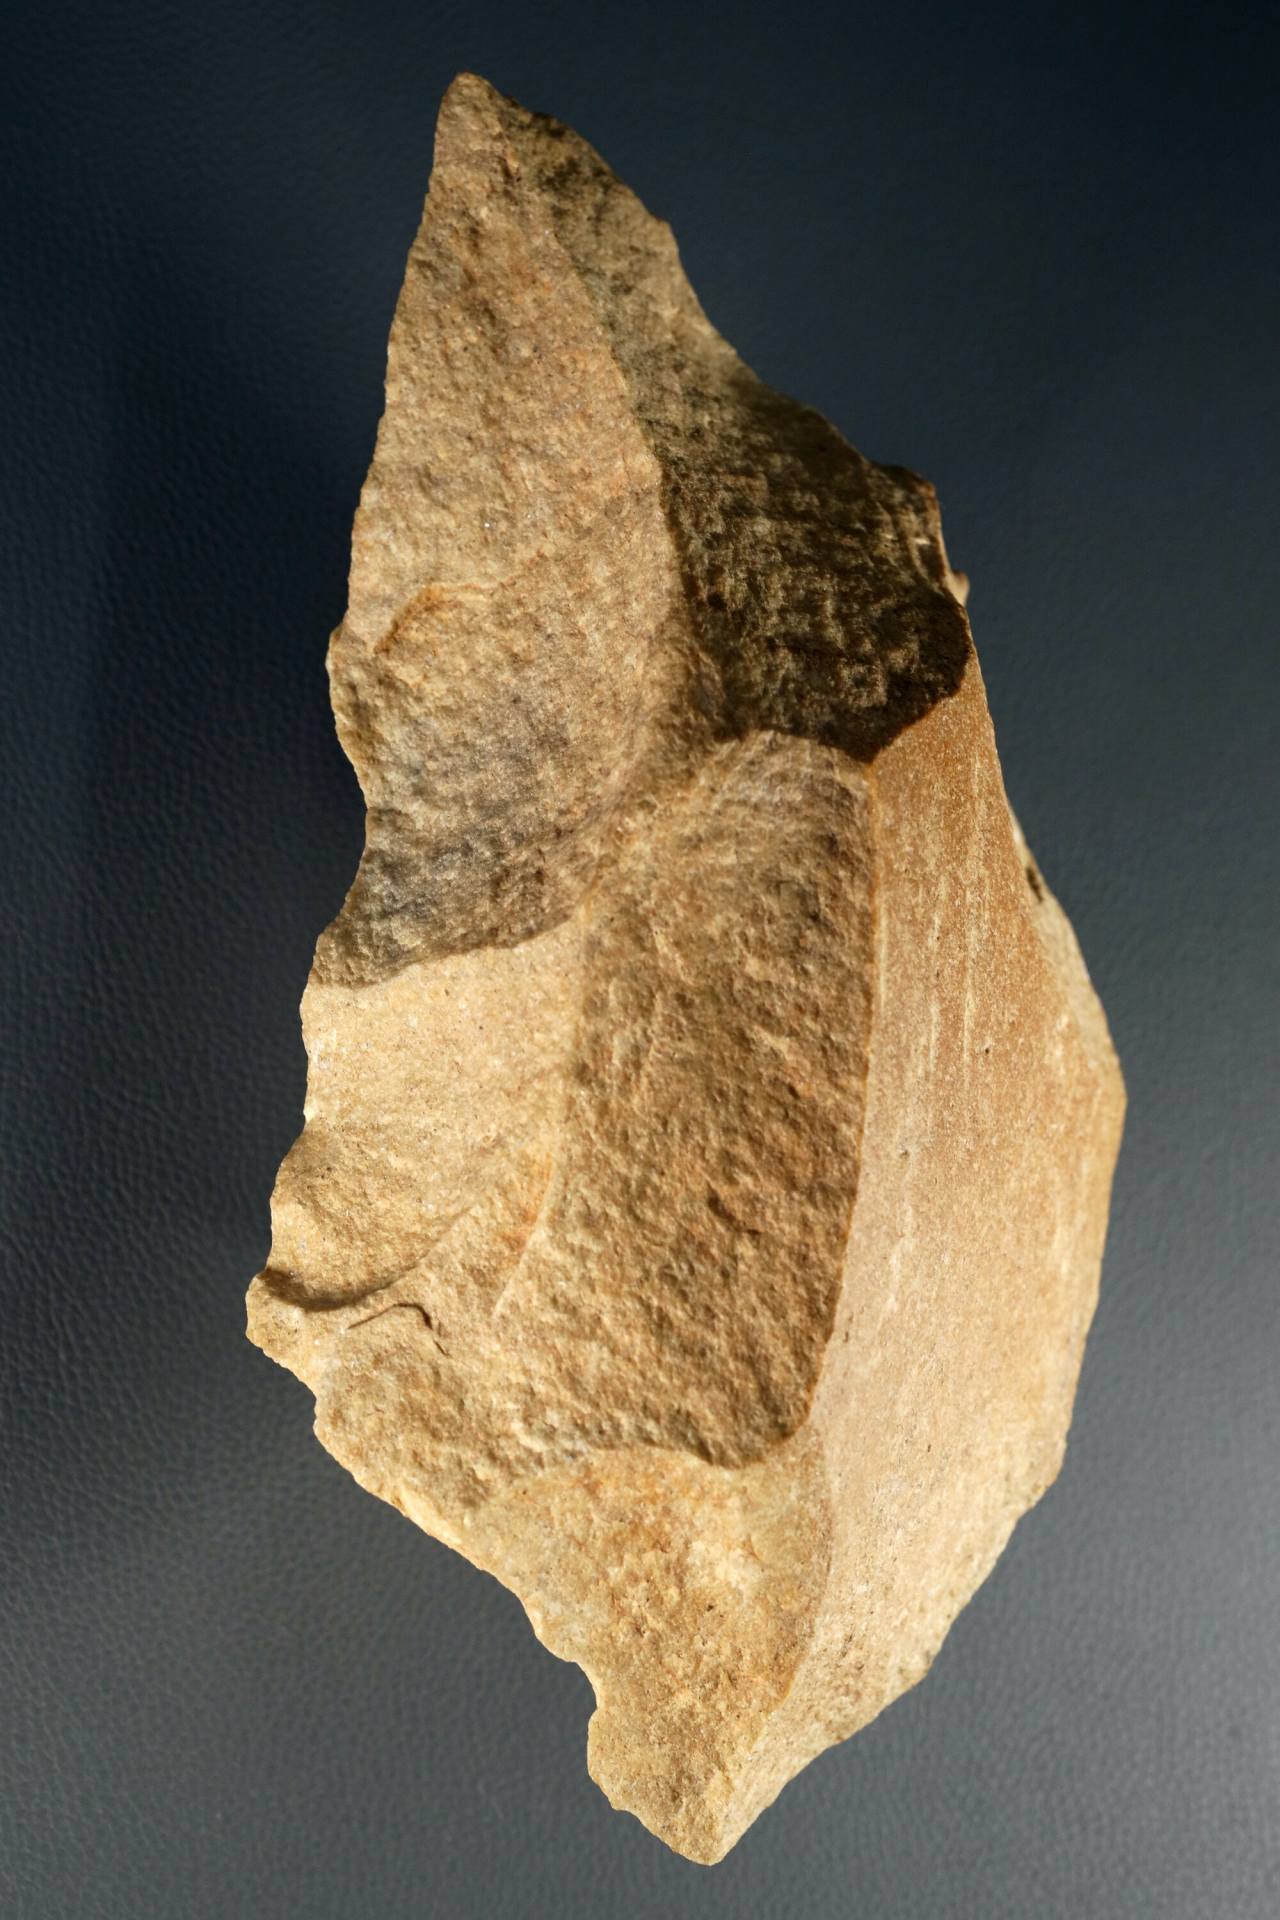 Jeongokri handaxe, an Acheulean-like handaxe from Korea estimated to have been used 70,000 to 40,000 years ago by ancient Hominin, the group of extinct human species of immediate human ancestors. Photo © Hyungwon Kang